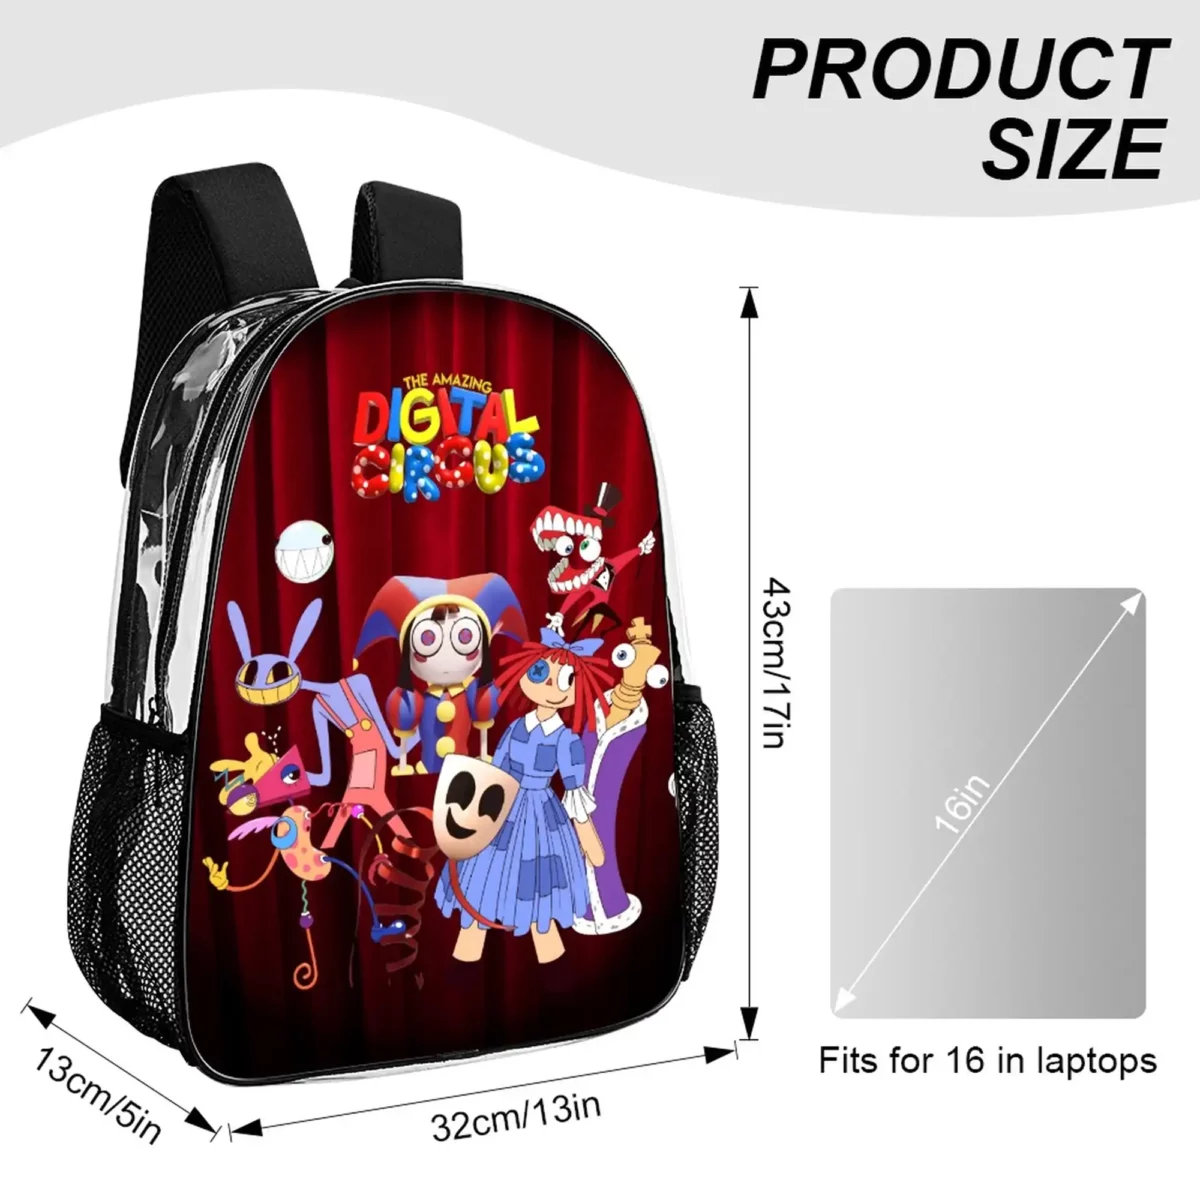 The Amazing Digital Circus Transparent Backpack – 17 Inches Book Bag Cool Kiddo 16